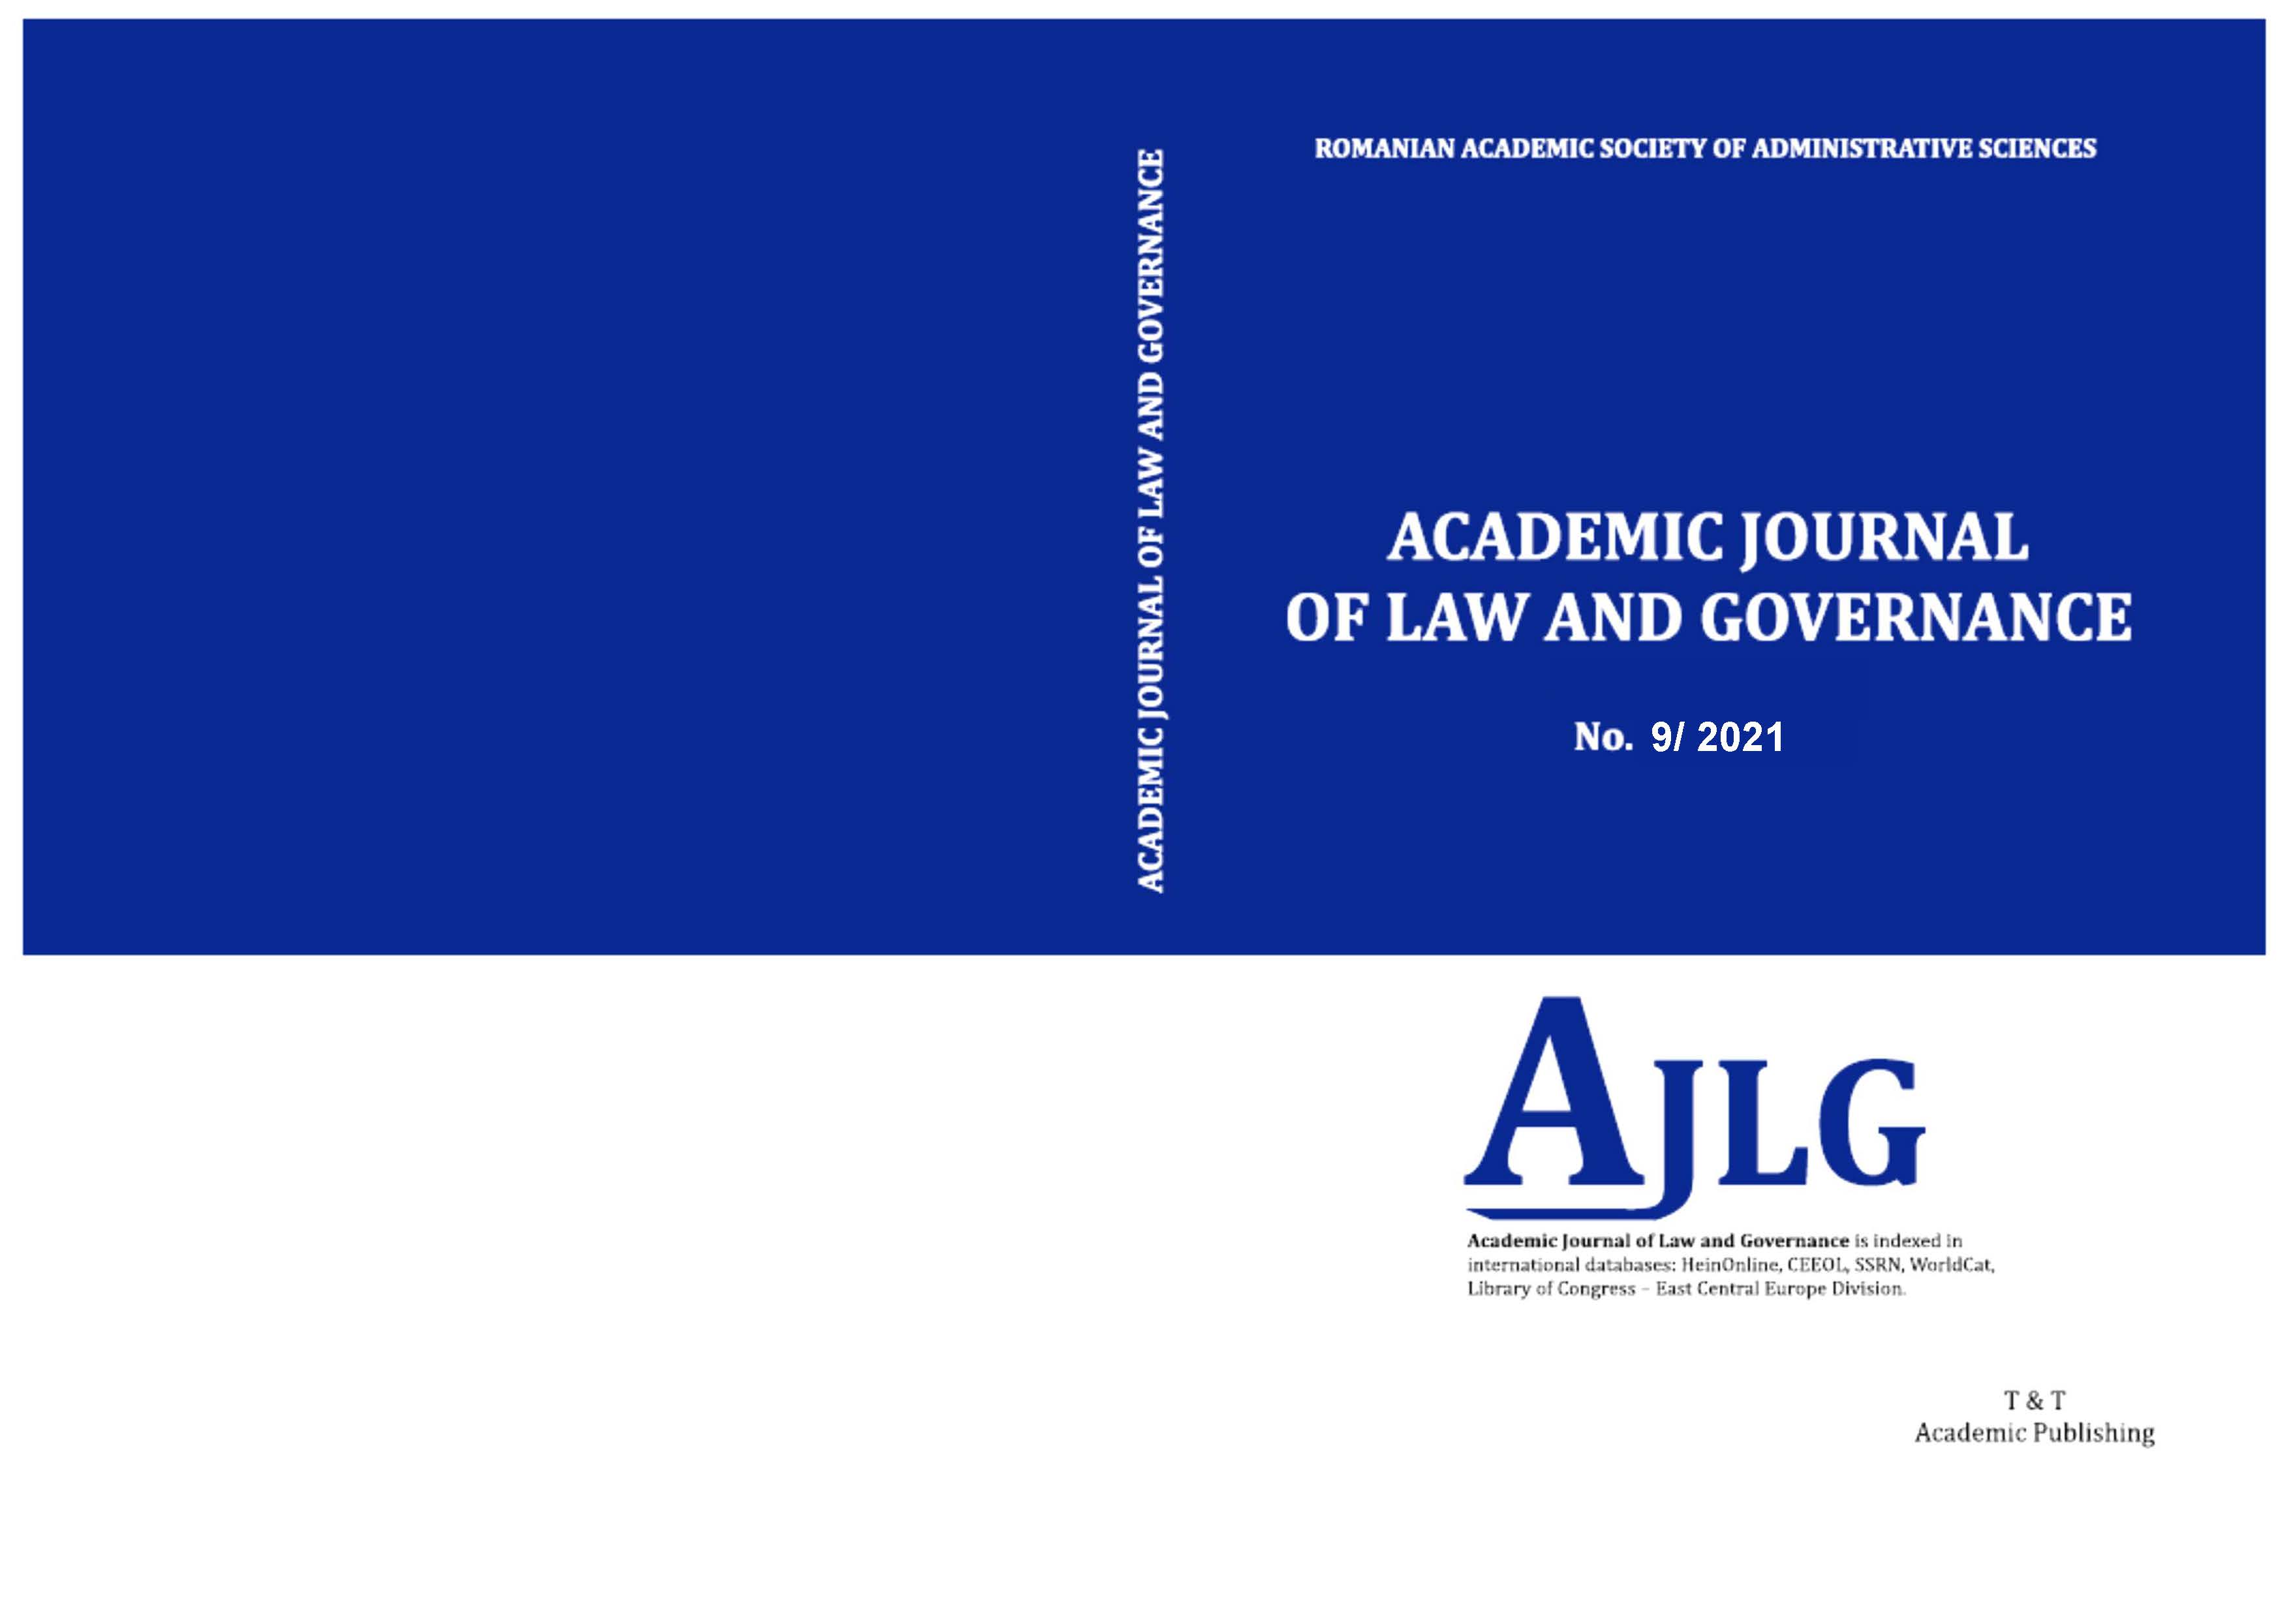 Requirements of the Rule of Law from the Perspective of European Union Law - Primary and Derived European Law Cover Image